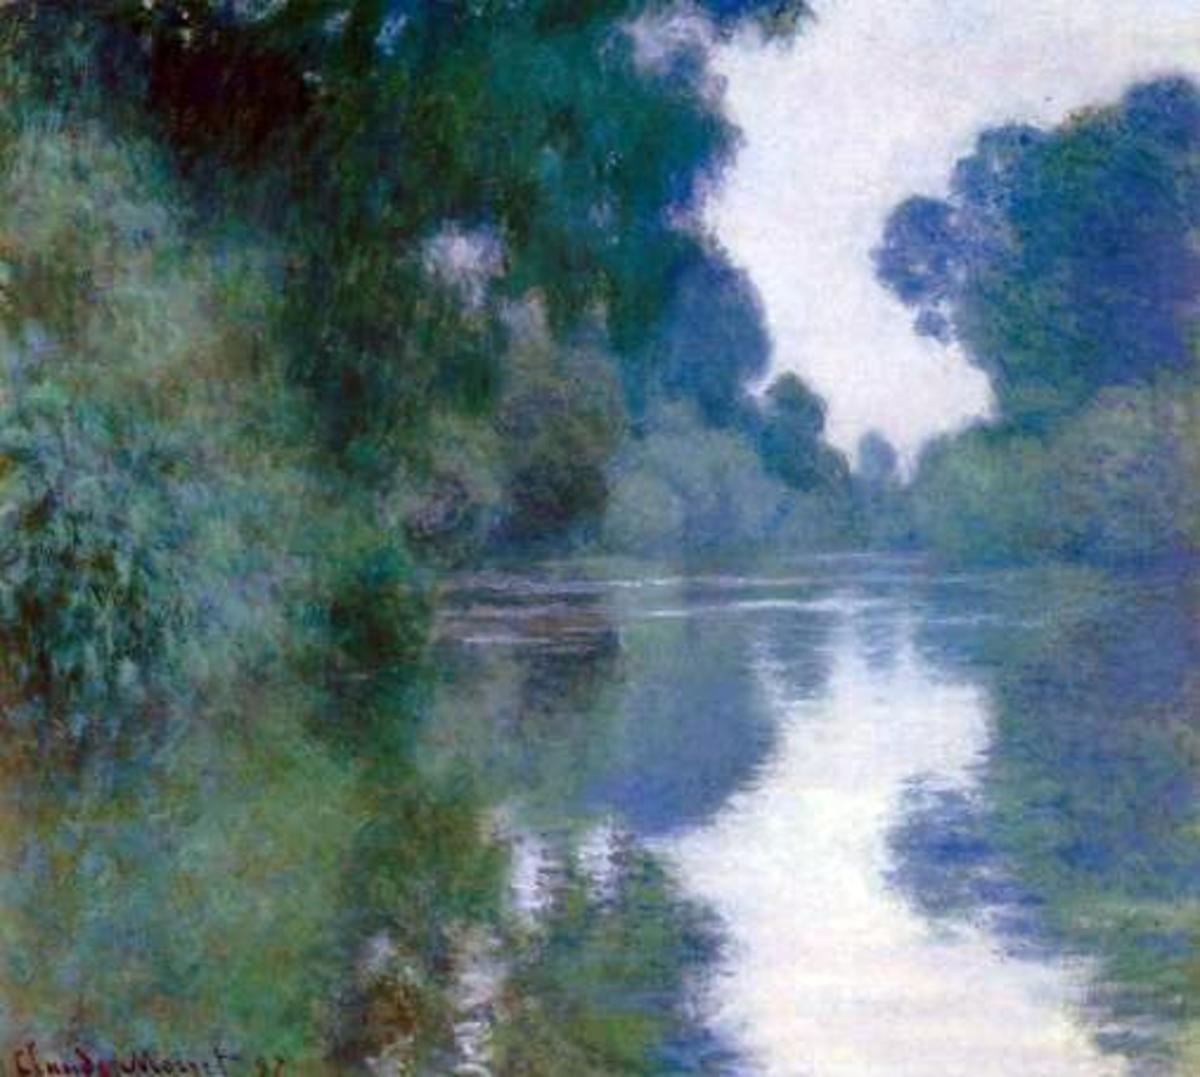 "BRANCH OF THE SEINE NEAR GIVENCHY" BY CLAUDE MONET IN 1897 (MUSEUM OF FINE ARTS, BOSTON)